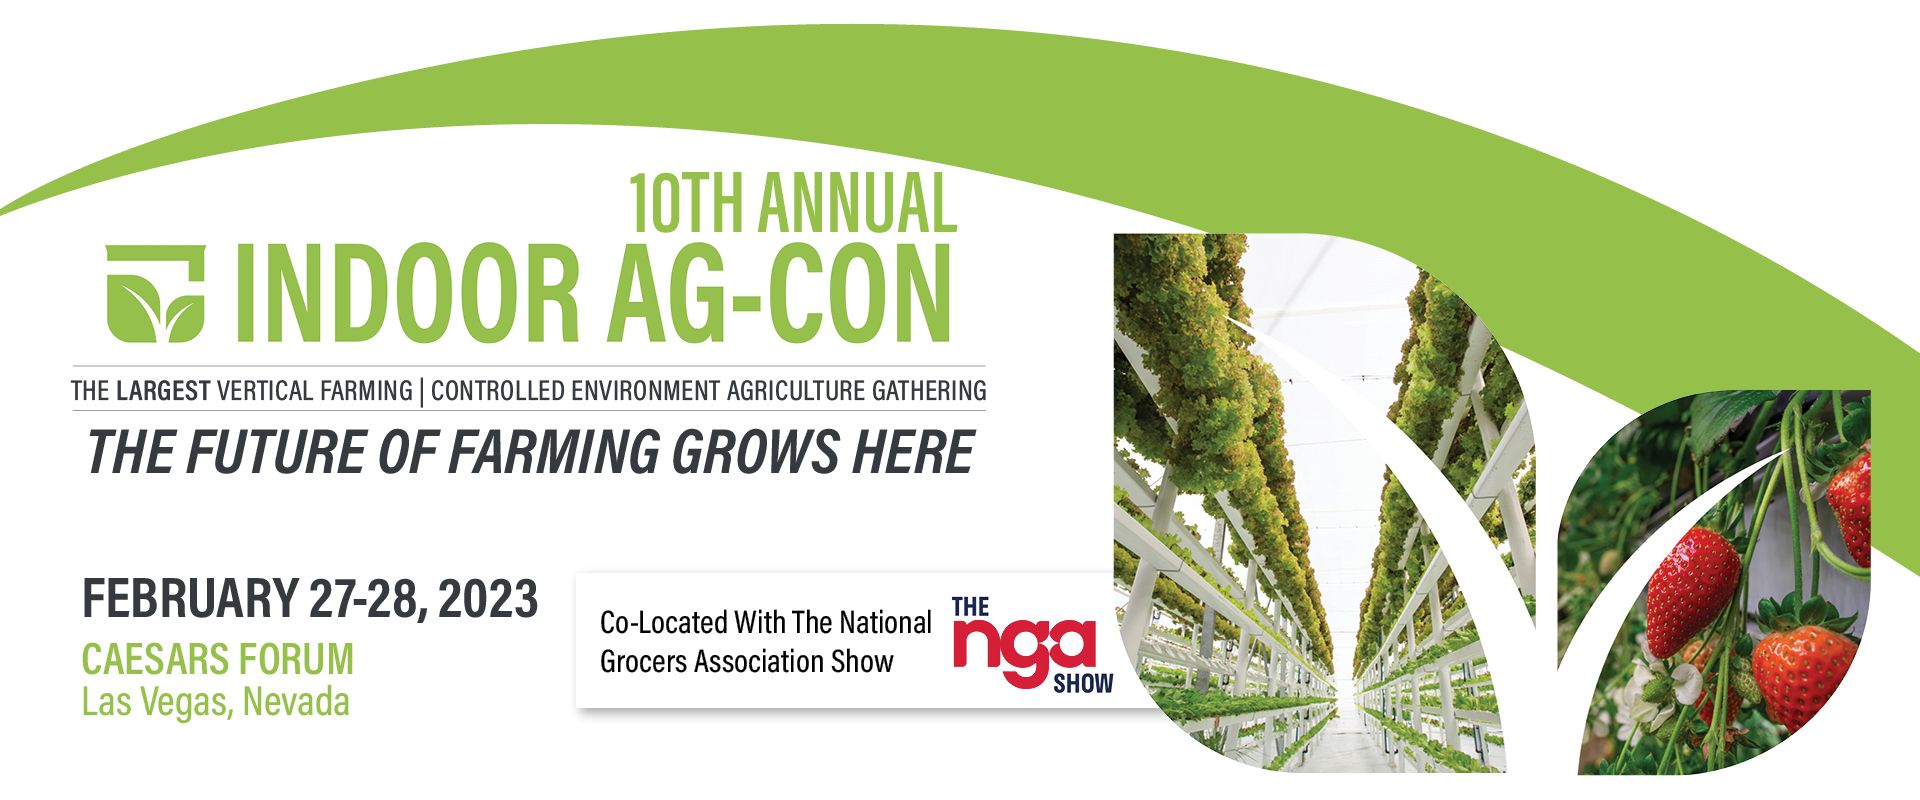 Indoor Ag-Con: the leading trade show for indoor farming and controlled environment agriculture. Connect with industry stakeholders and explore new business opportunities.